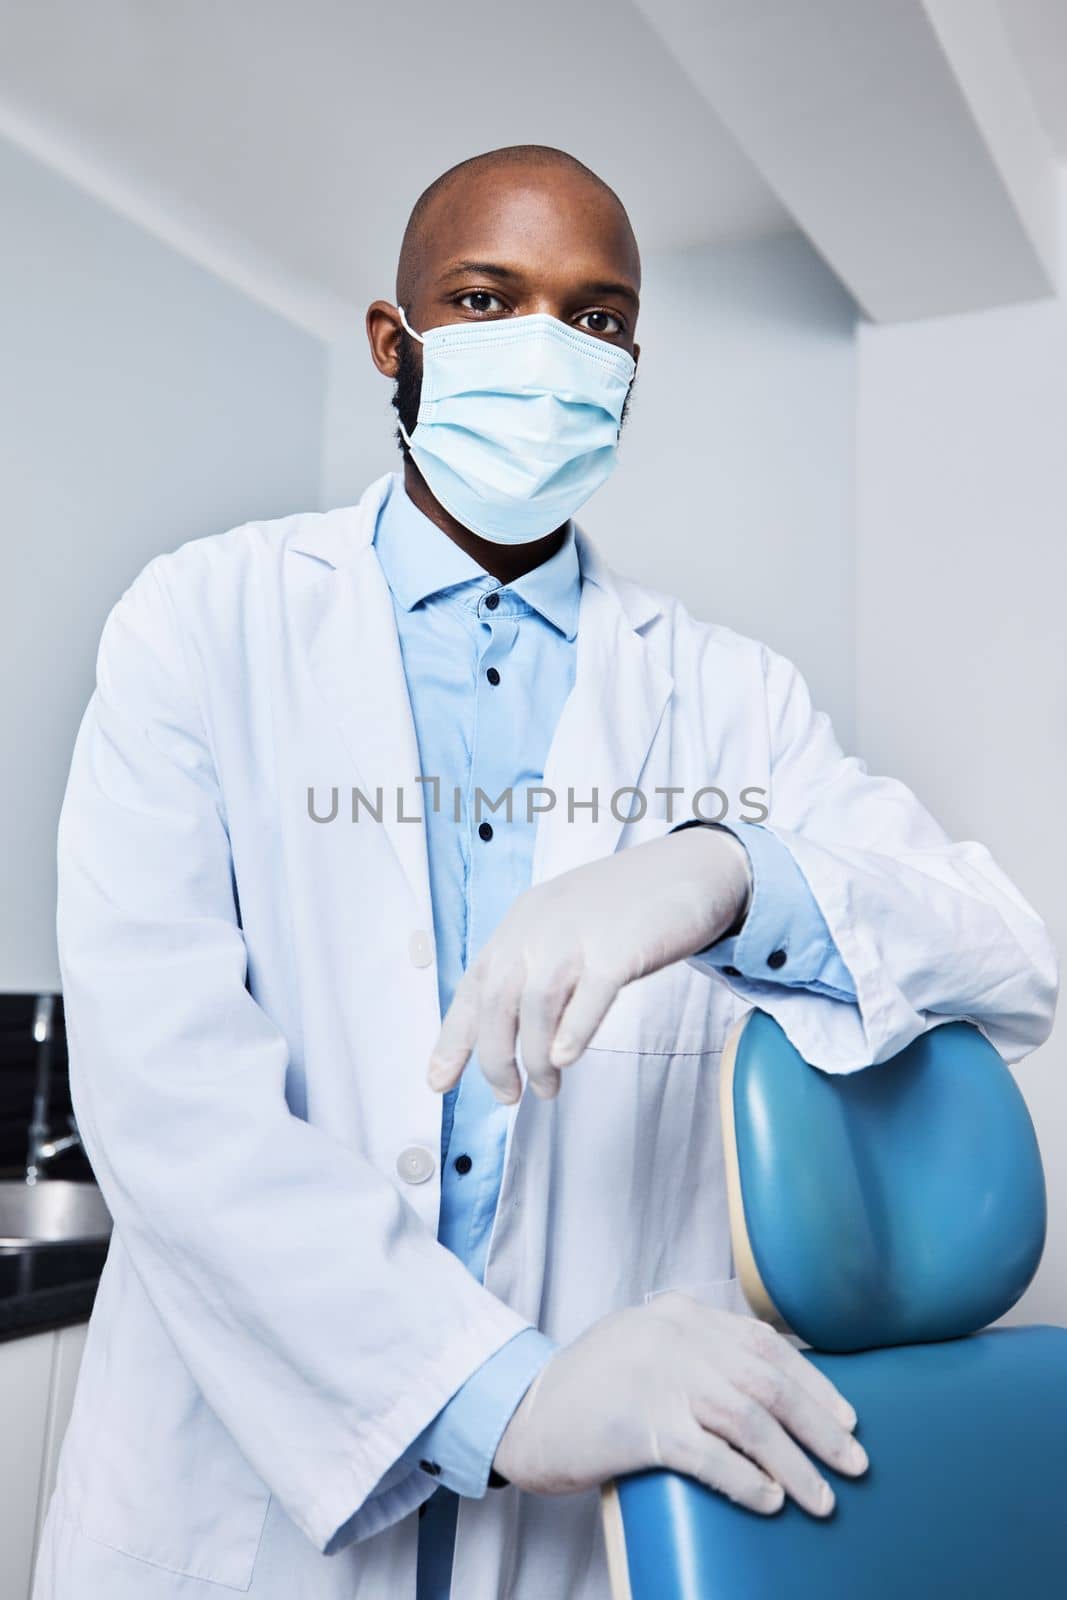 Ready to see the next patient. Portrait of a masked young man working in a dentists office